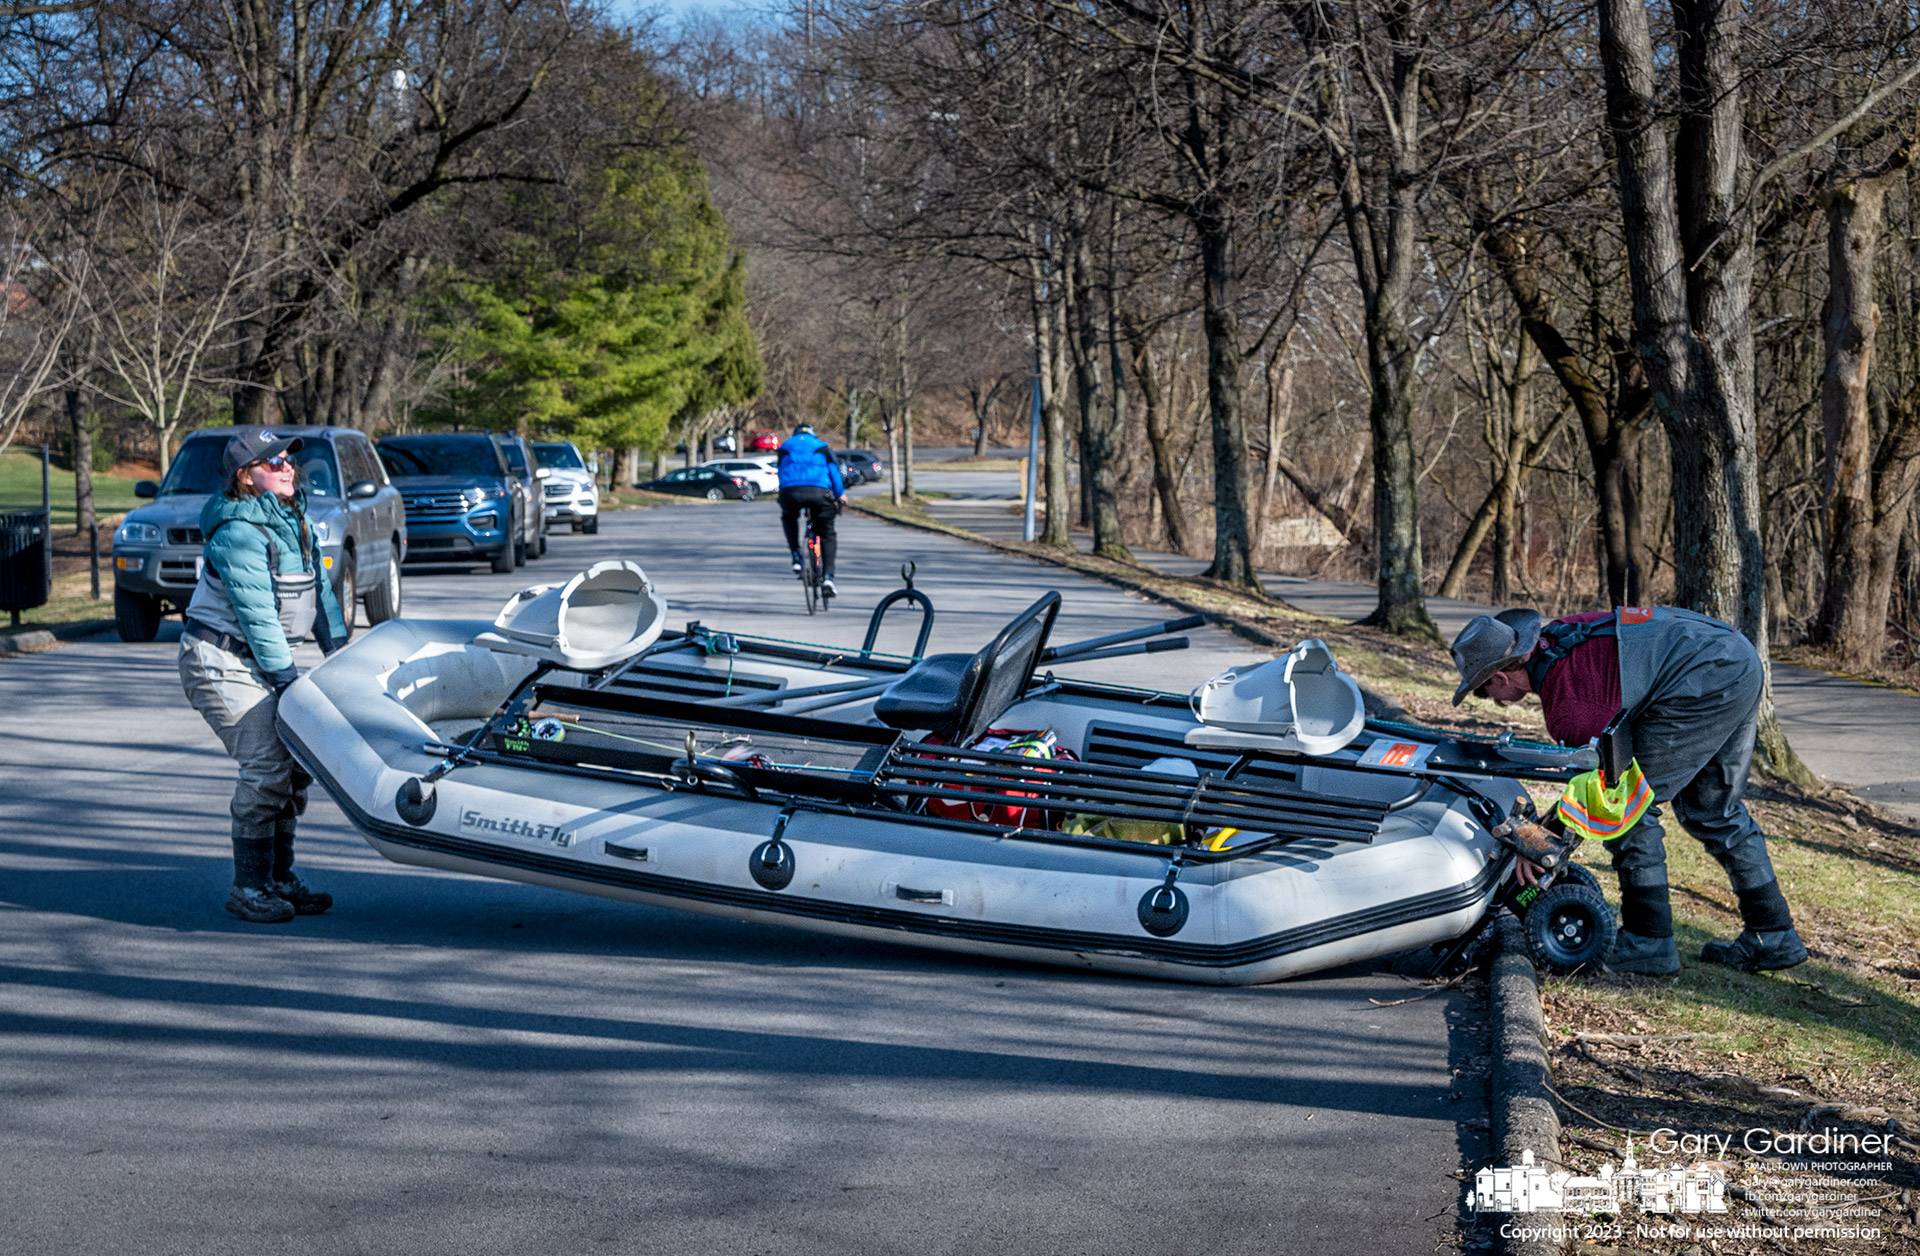 A pair of anglers retrieve their boat from the shoreline at Alum Creek Park North at the completion of a fishing trip down Alum Creek from the dam at Alum Creek State Park to Westerville. My Final Photo for February 26, 2023.